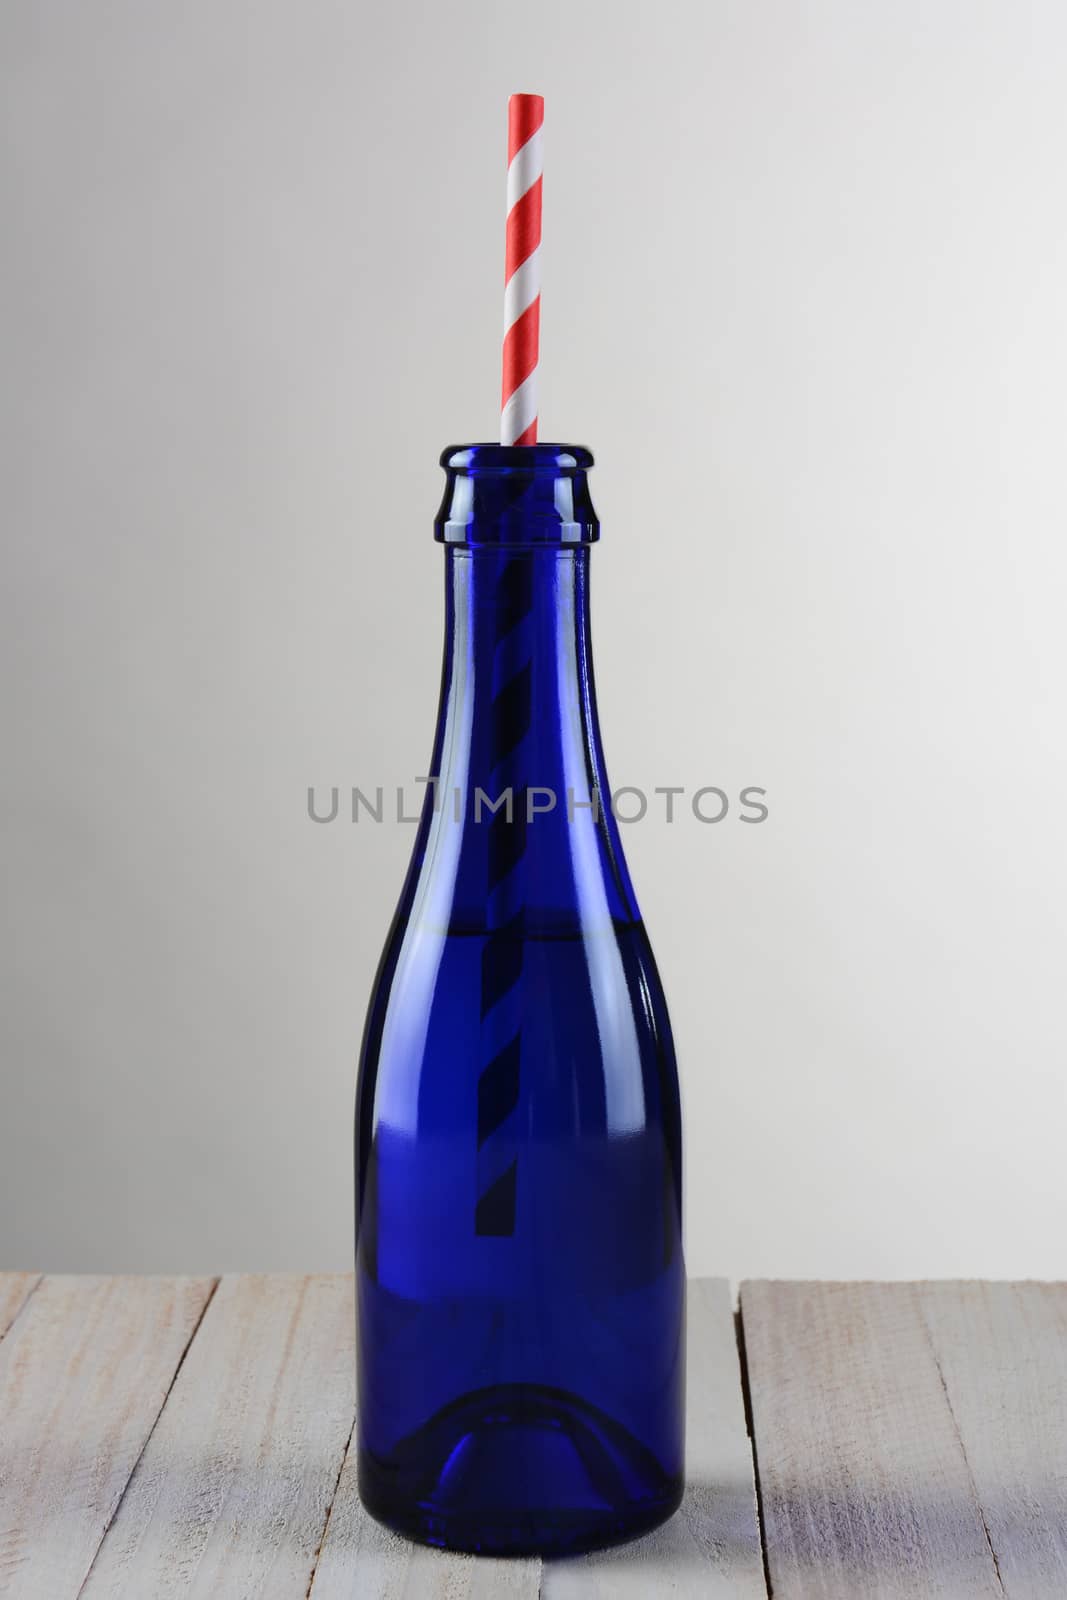 Closeup of a blue bottle with a red striped drinking straw. The bottle is on a rustic wood table with a light to dark gray background.